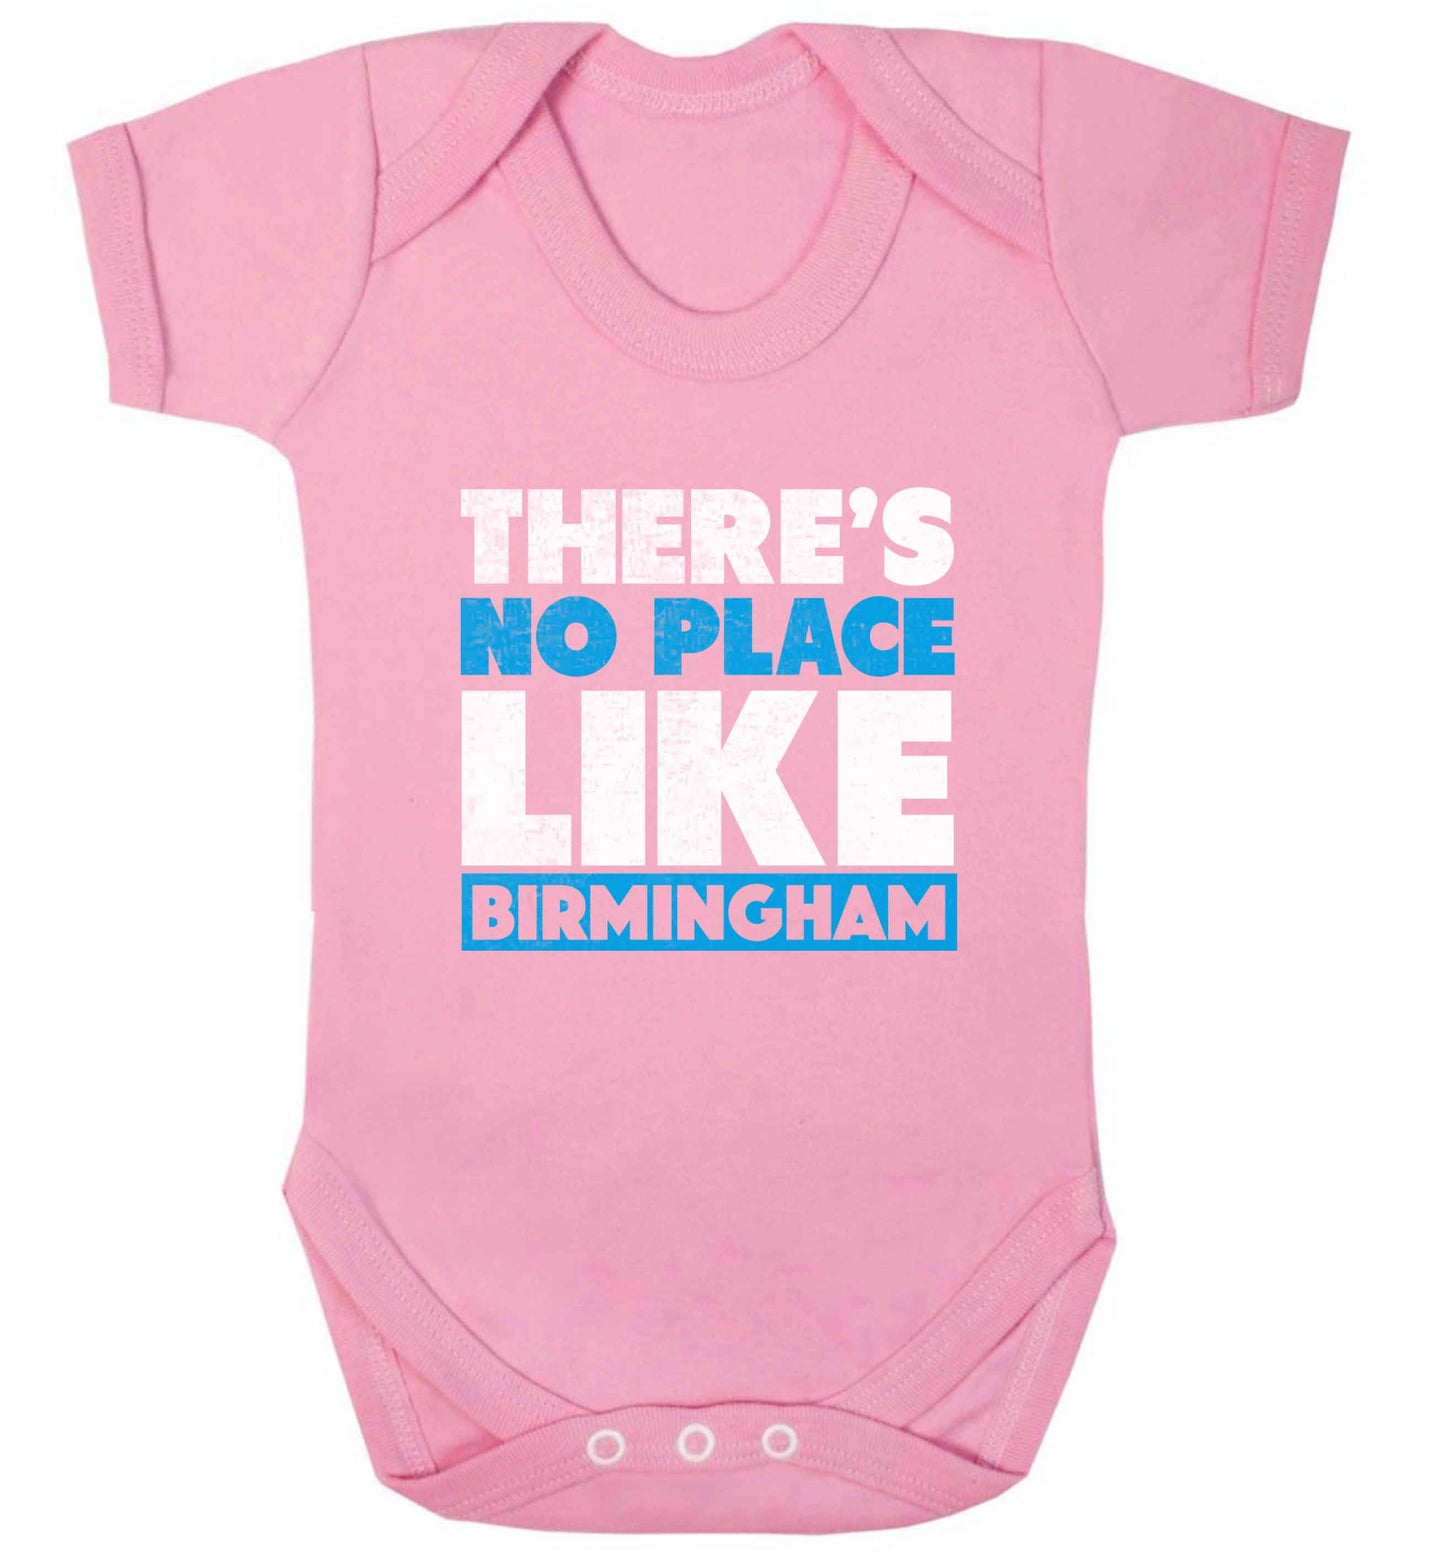 There's no place like Birmingham baby vest pale pink 18-24 months